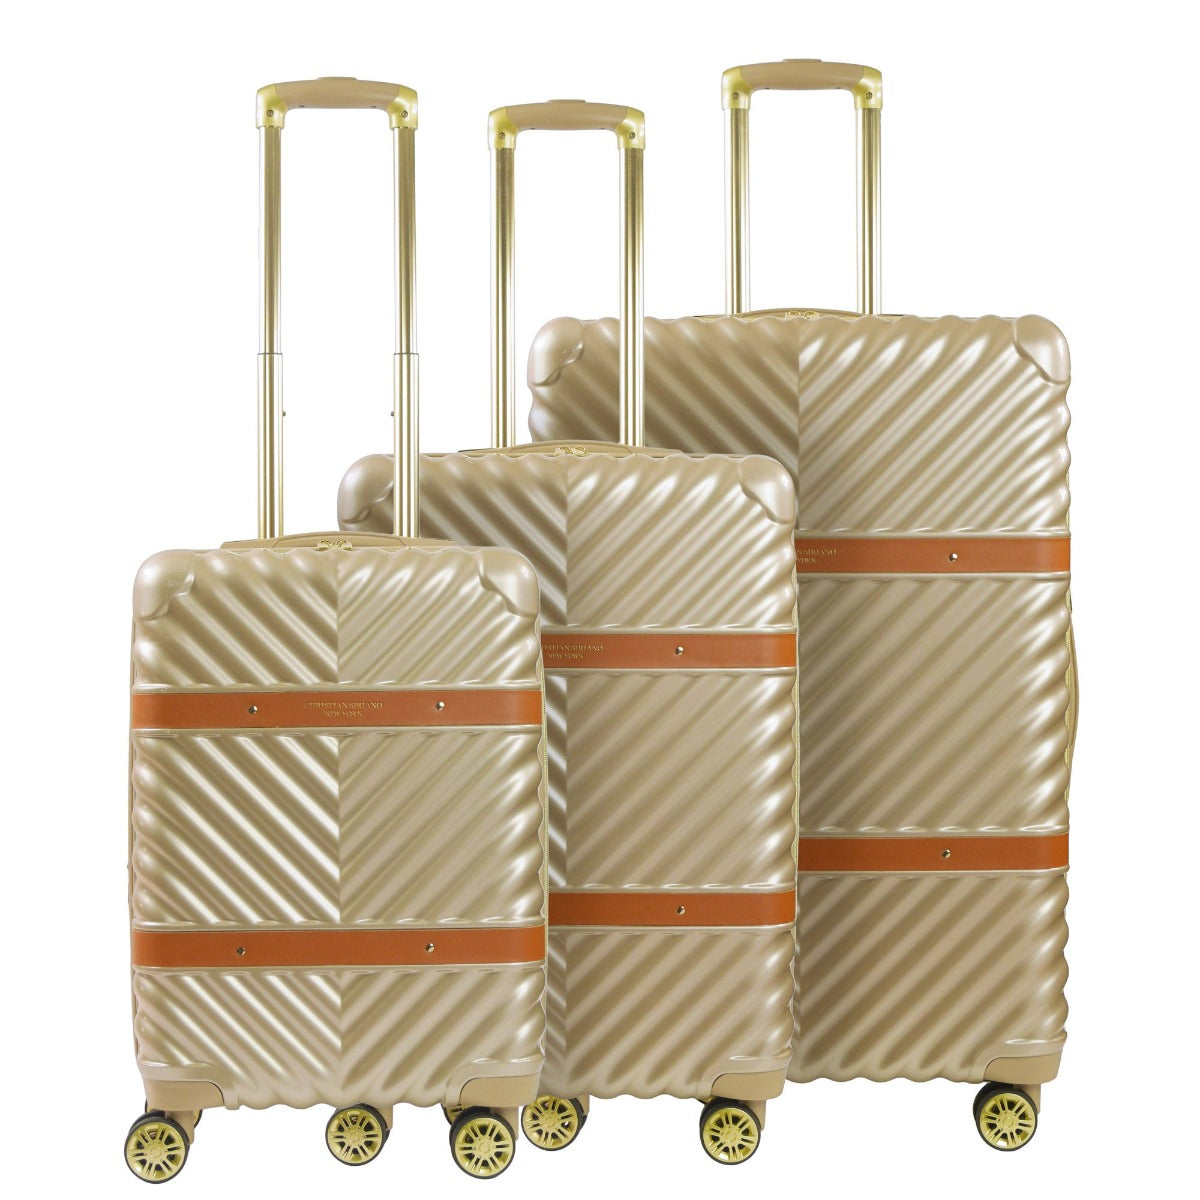 Christian Siriano New York Stella hardside spinner 3 piece suitcase set taupe - best durable suitcase sets for travel